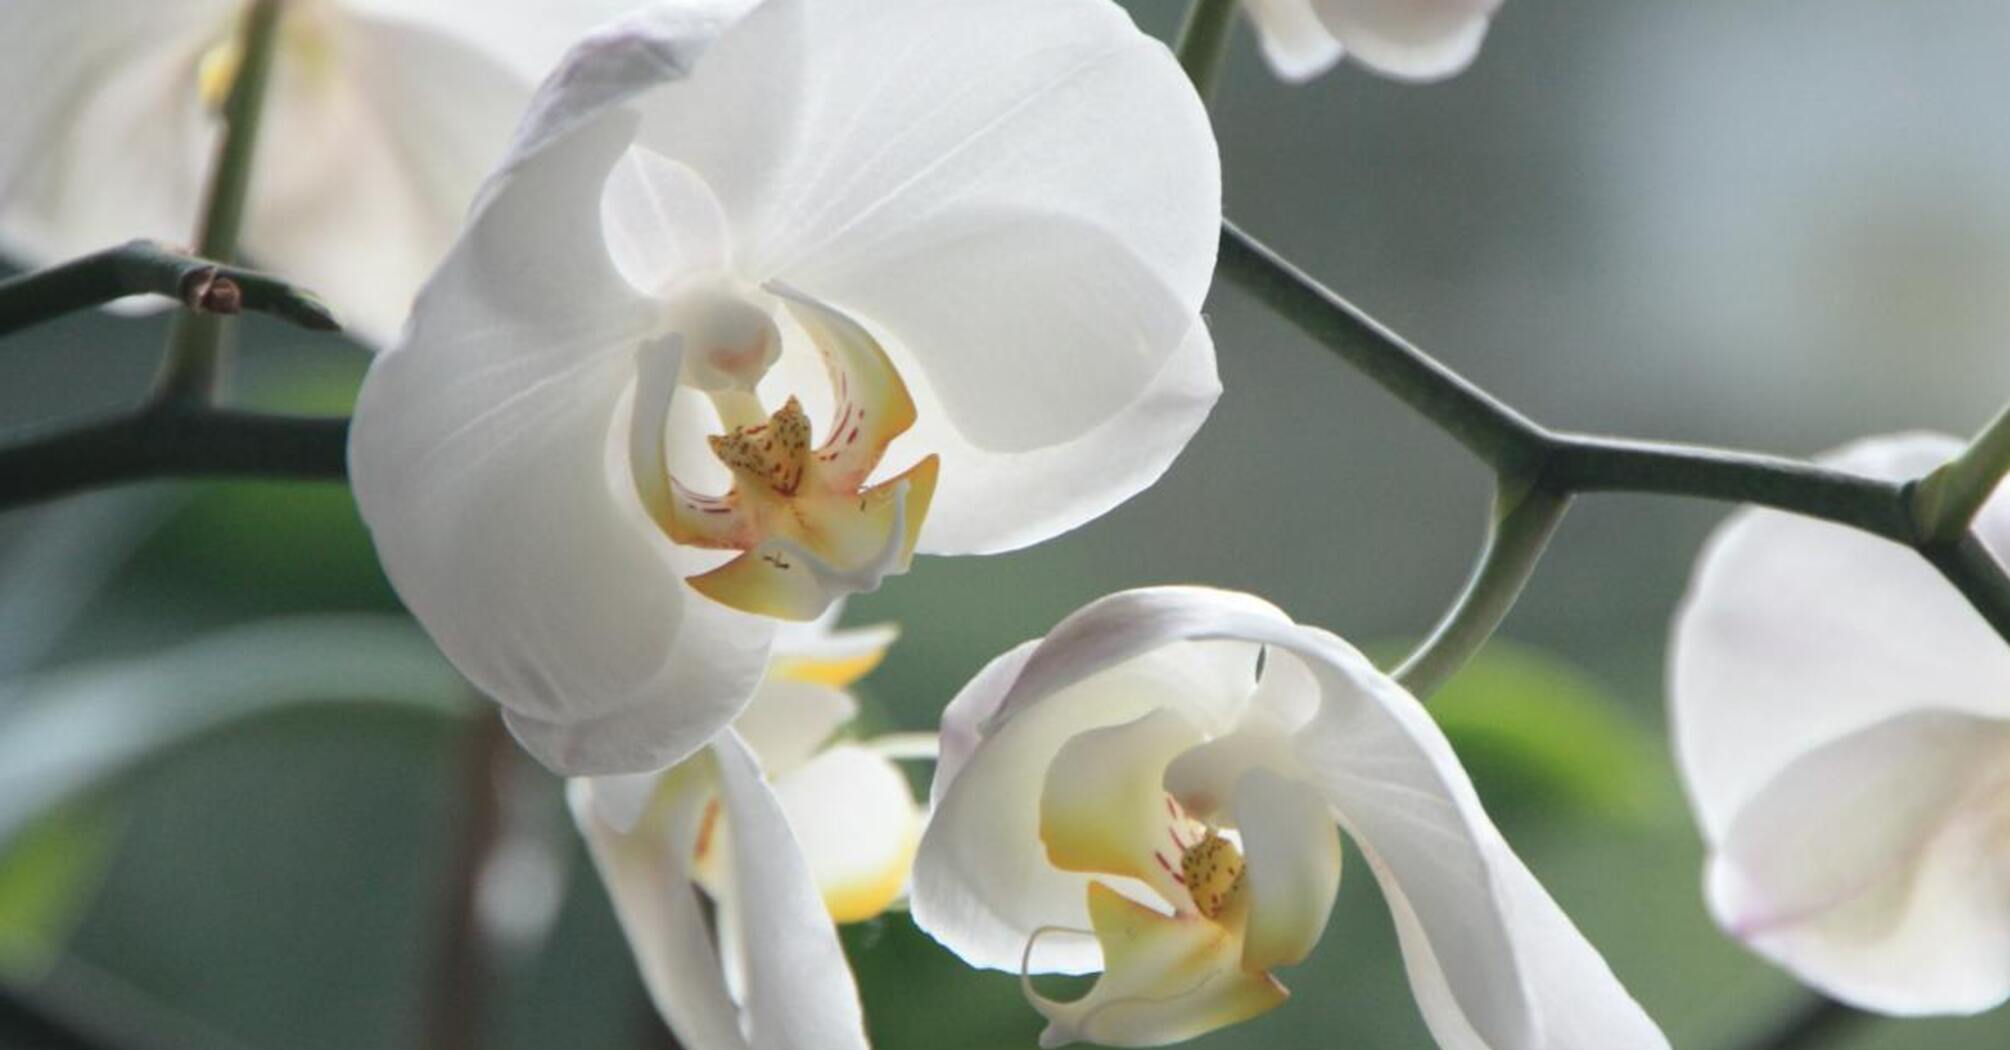 Orchids will bloom all year round if you water them with this solution